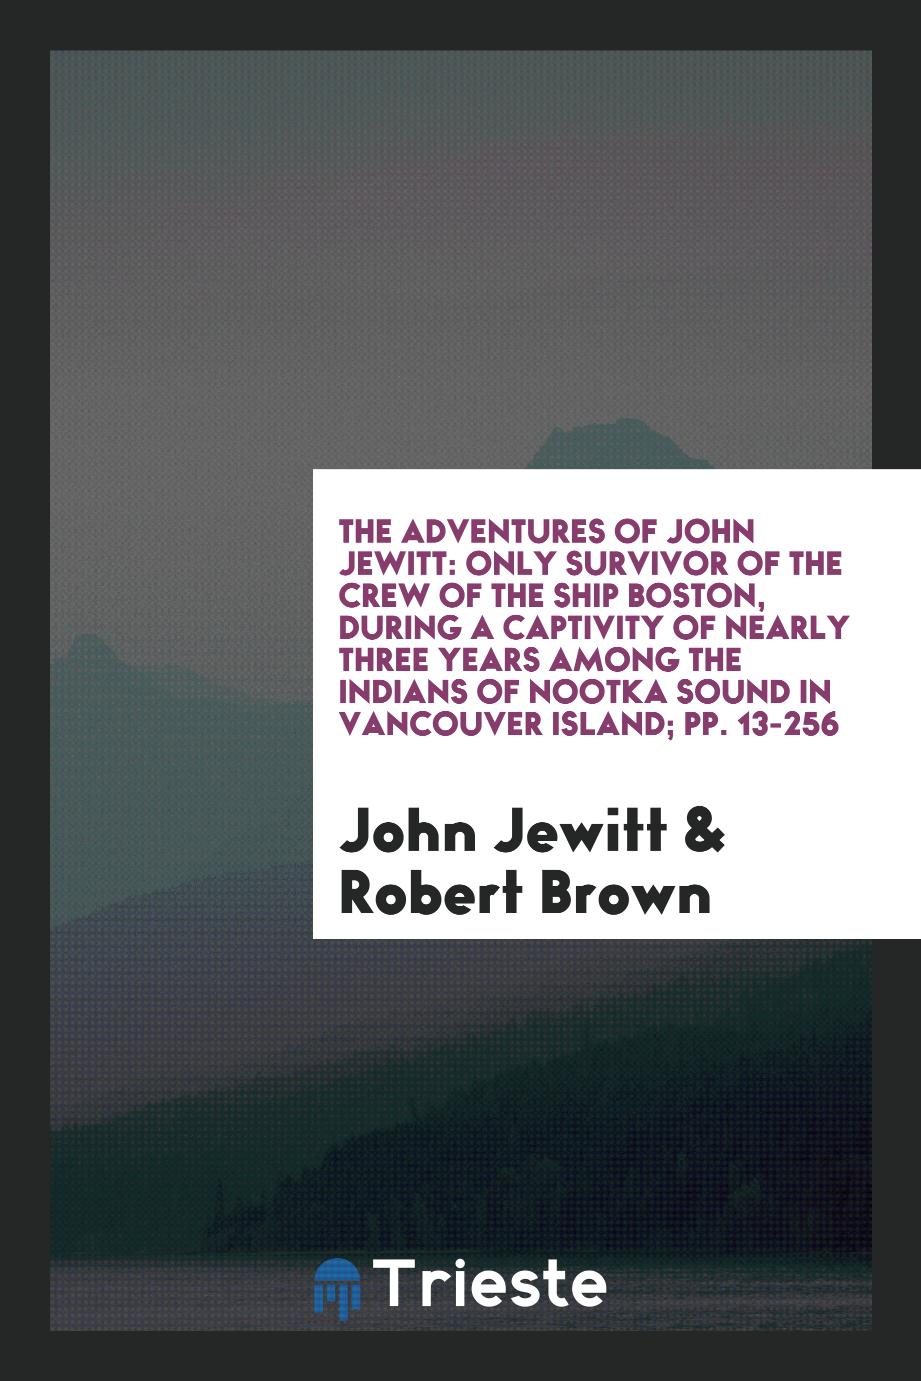 The Adventures of John Jewitt: Only Survivor of the Crew of the Ship Boston, During a Captivity of Nearly Three Years Among the Indians of Nootka Sound in Vancouver Island; pp. 13-256